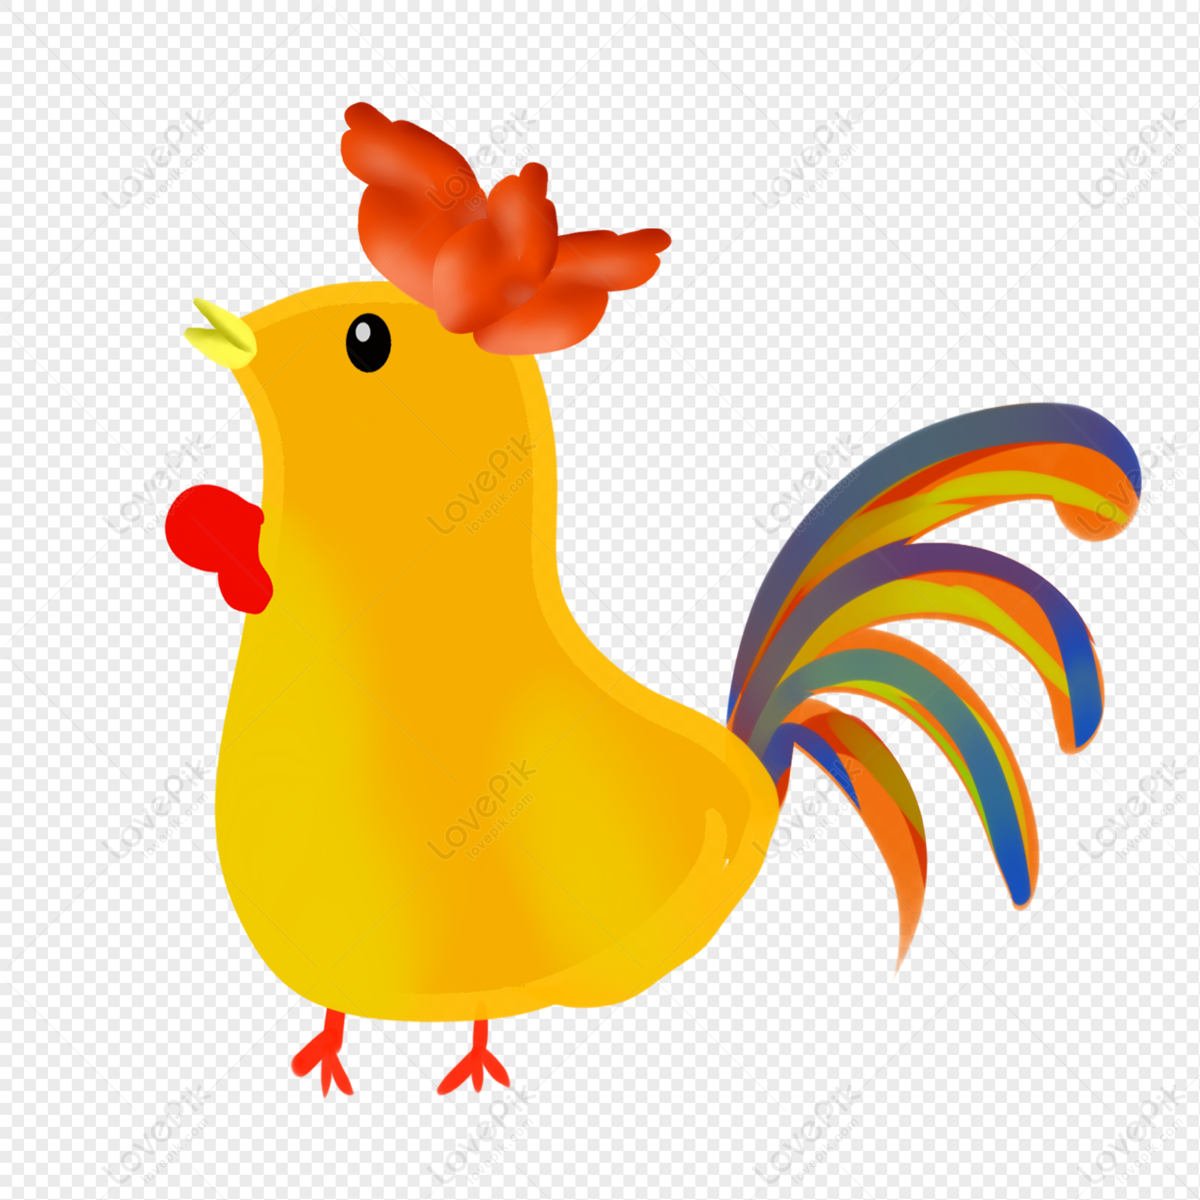 12 Zodiac Cartoon Chicken PNG Hd Transparent Image And Clipart Image For  Free Download - Lovepik | 401148384